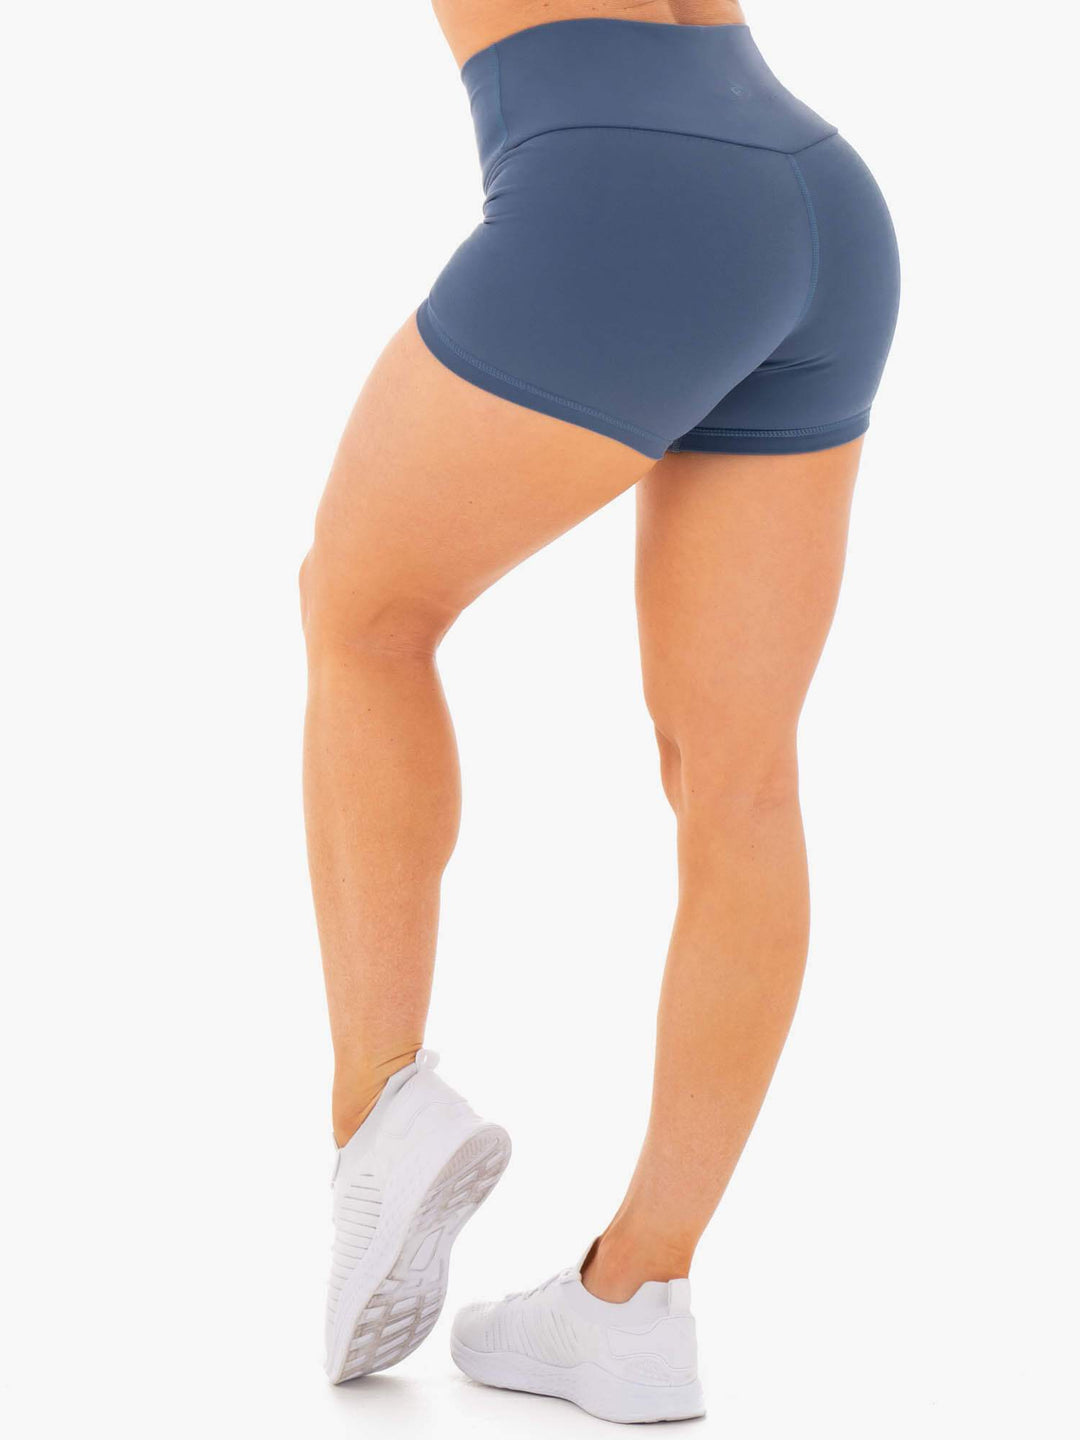 Motion High Waisted Shorts - Steel Blue Clothing Ryderwear 